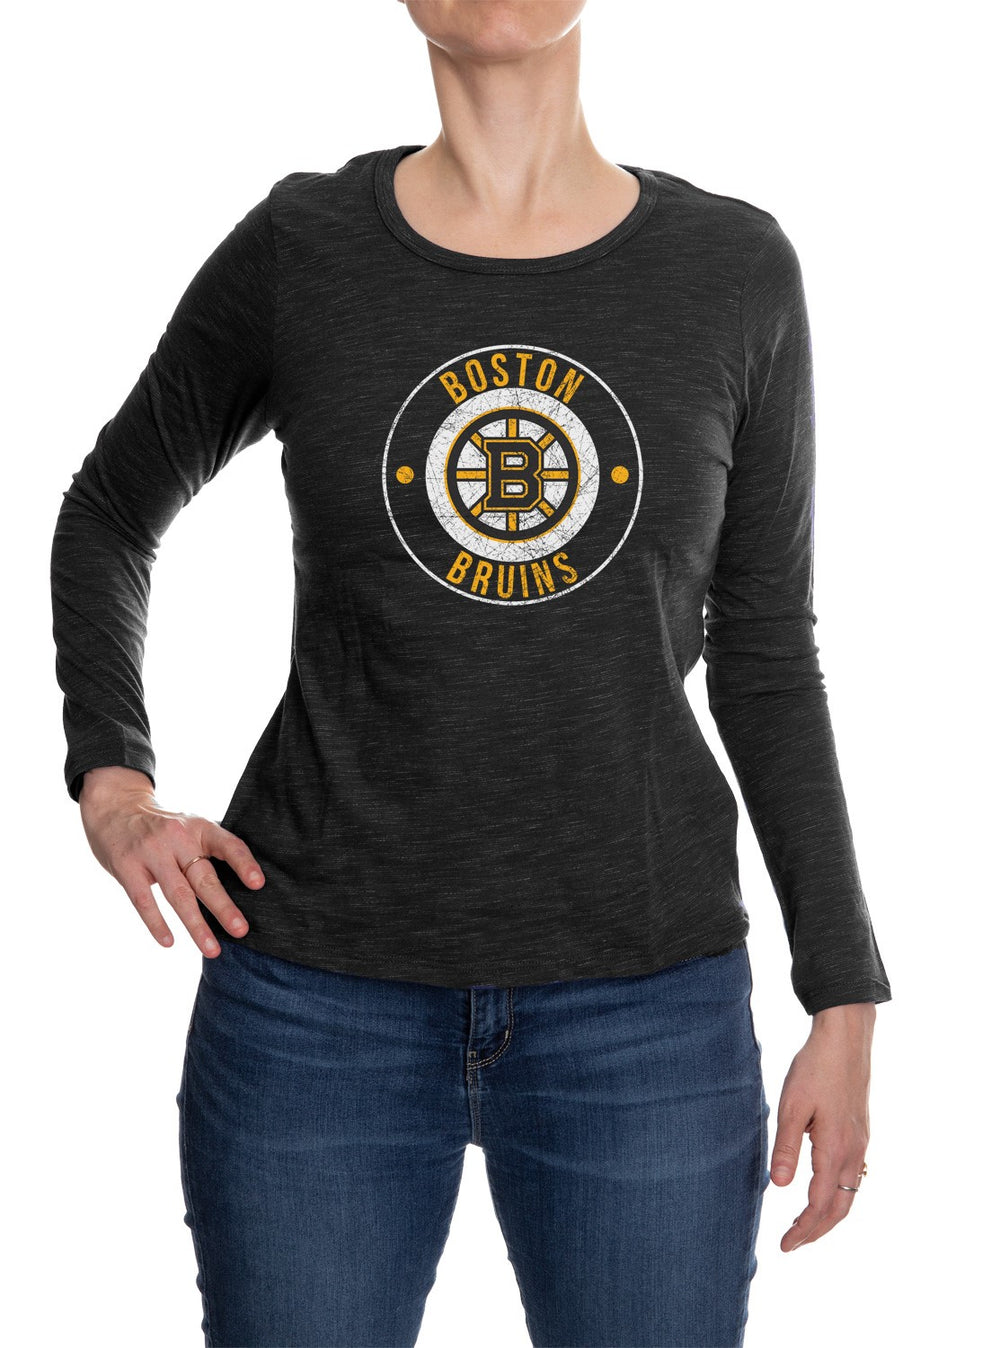 Boston Bruins Distressed Logo Long Sleeve Shirt for Women in Black Front View